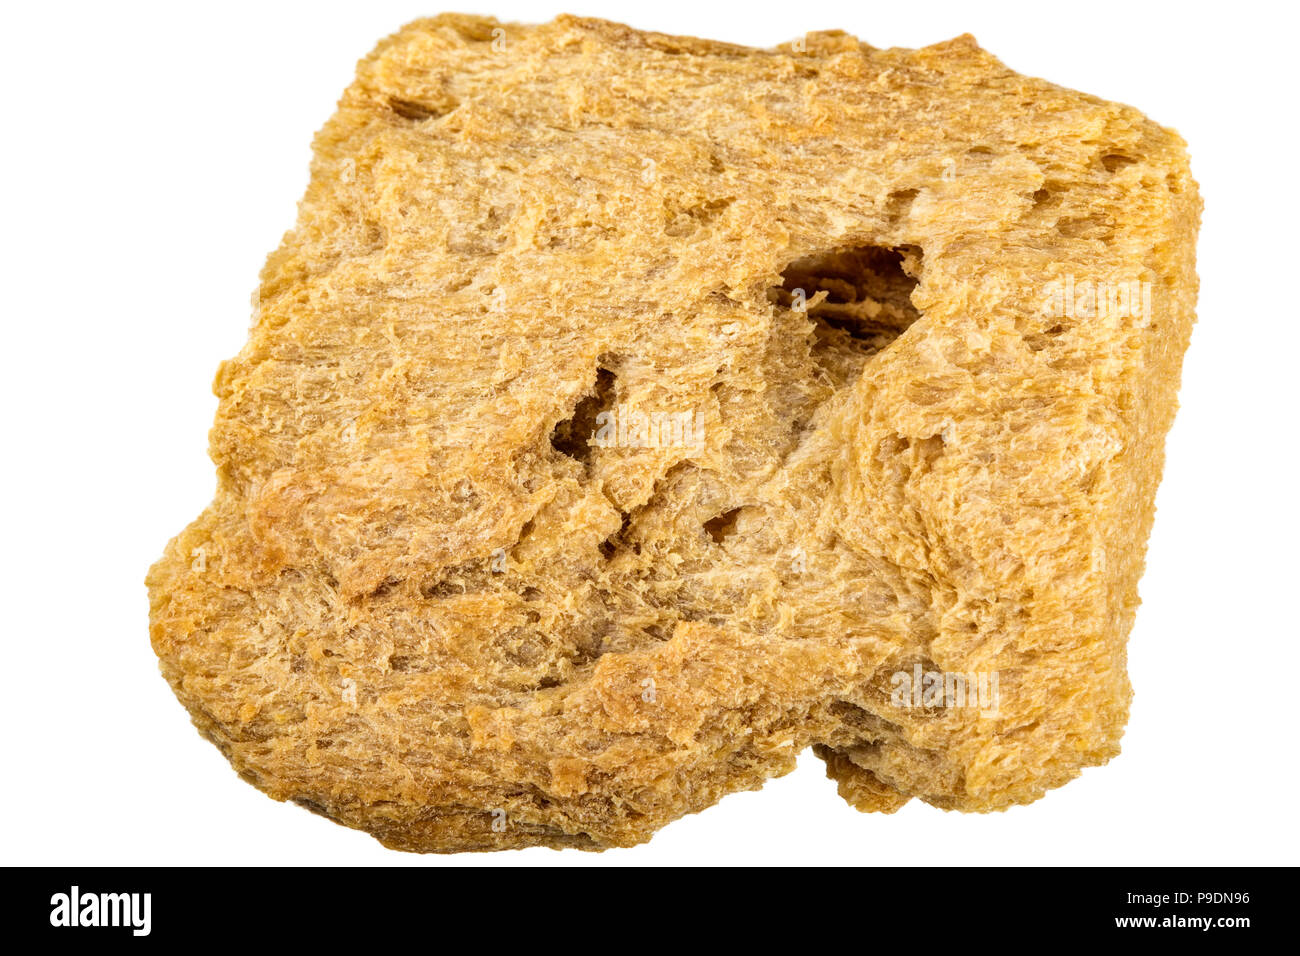 One piece of dried soya meat isolated over white background - close up view Stock Photo